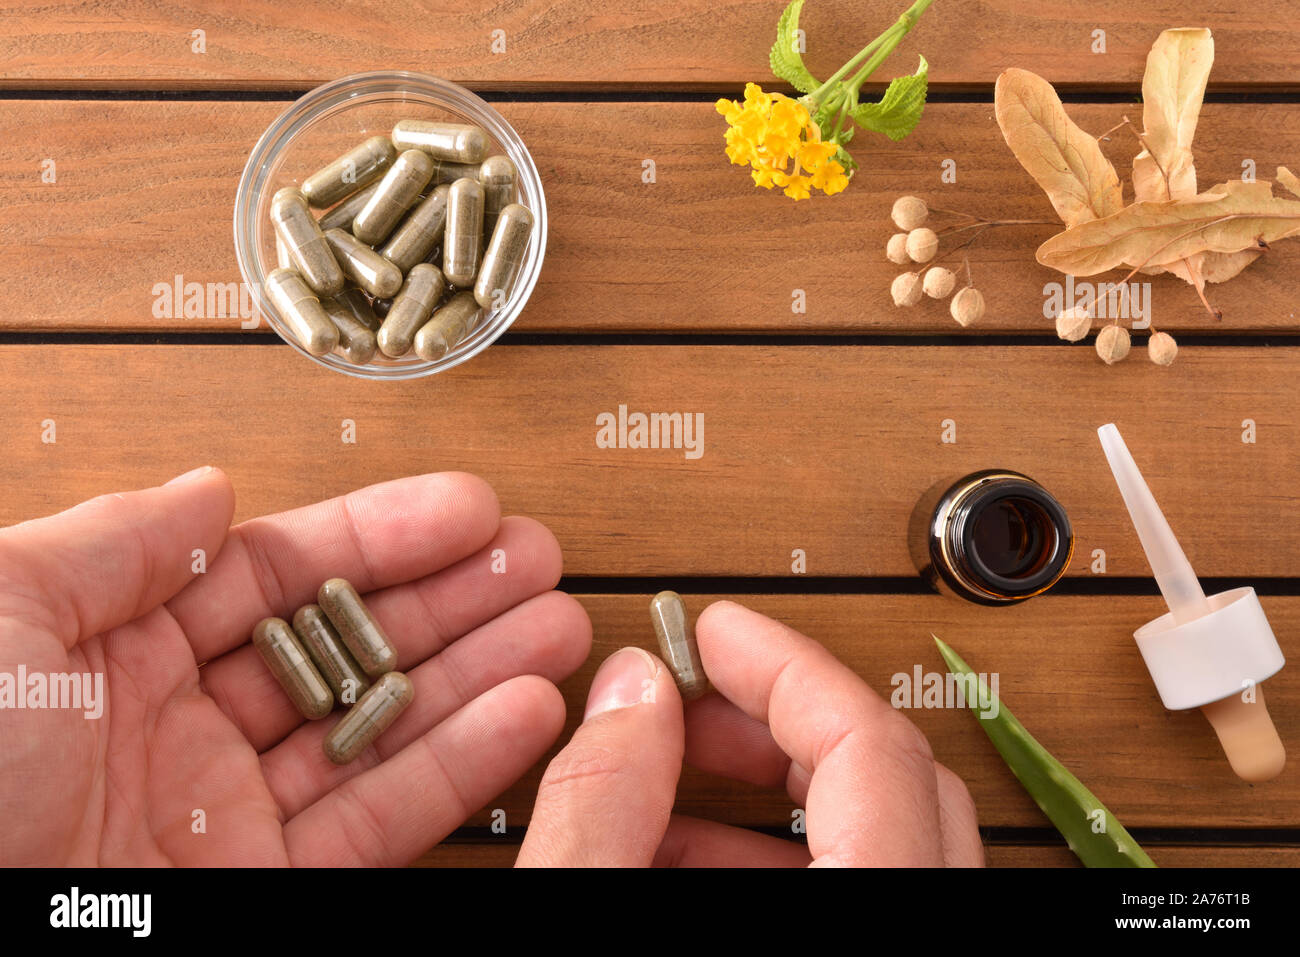 Hands taking natural medicine capsules of herbs on wooden table with glass container with plant capsules and dropper bottle with medicinal liquid. Alt Stock Photo